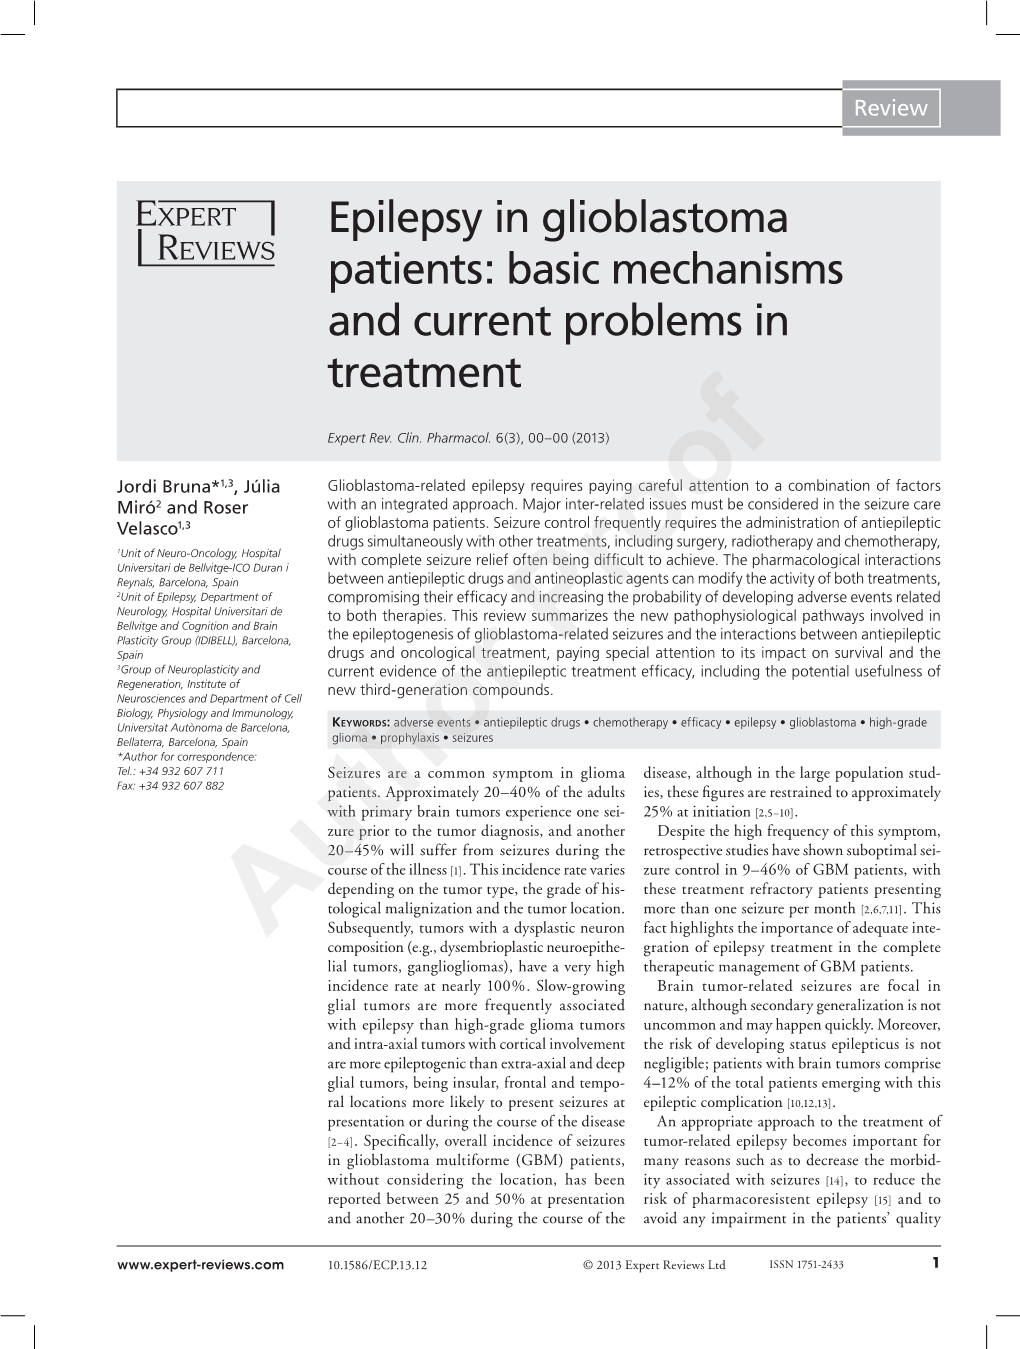 Epilepsy in Glioblastoma Patients: Basic Mechanisms and Current